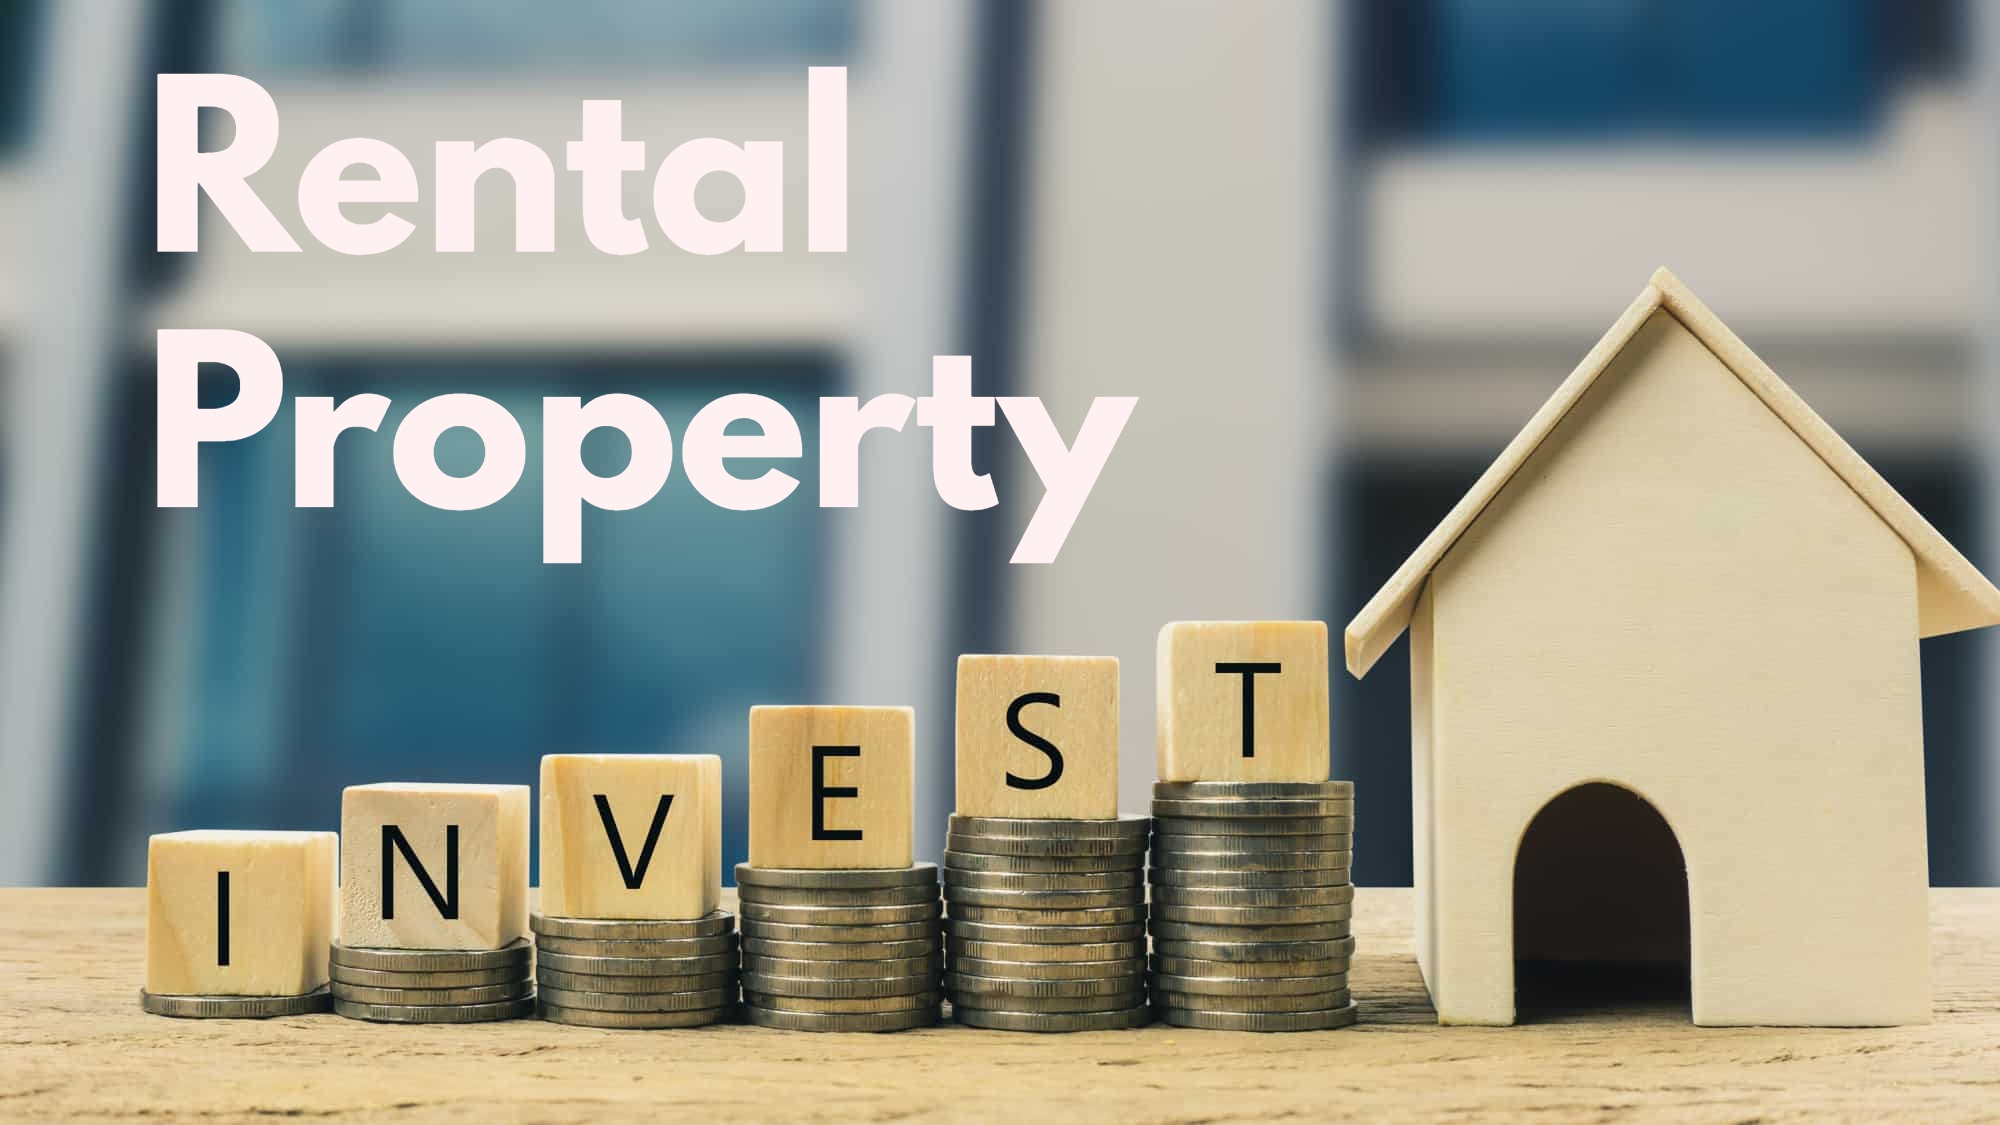 Our Rental Property(ies) Investment